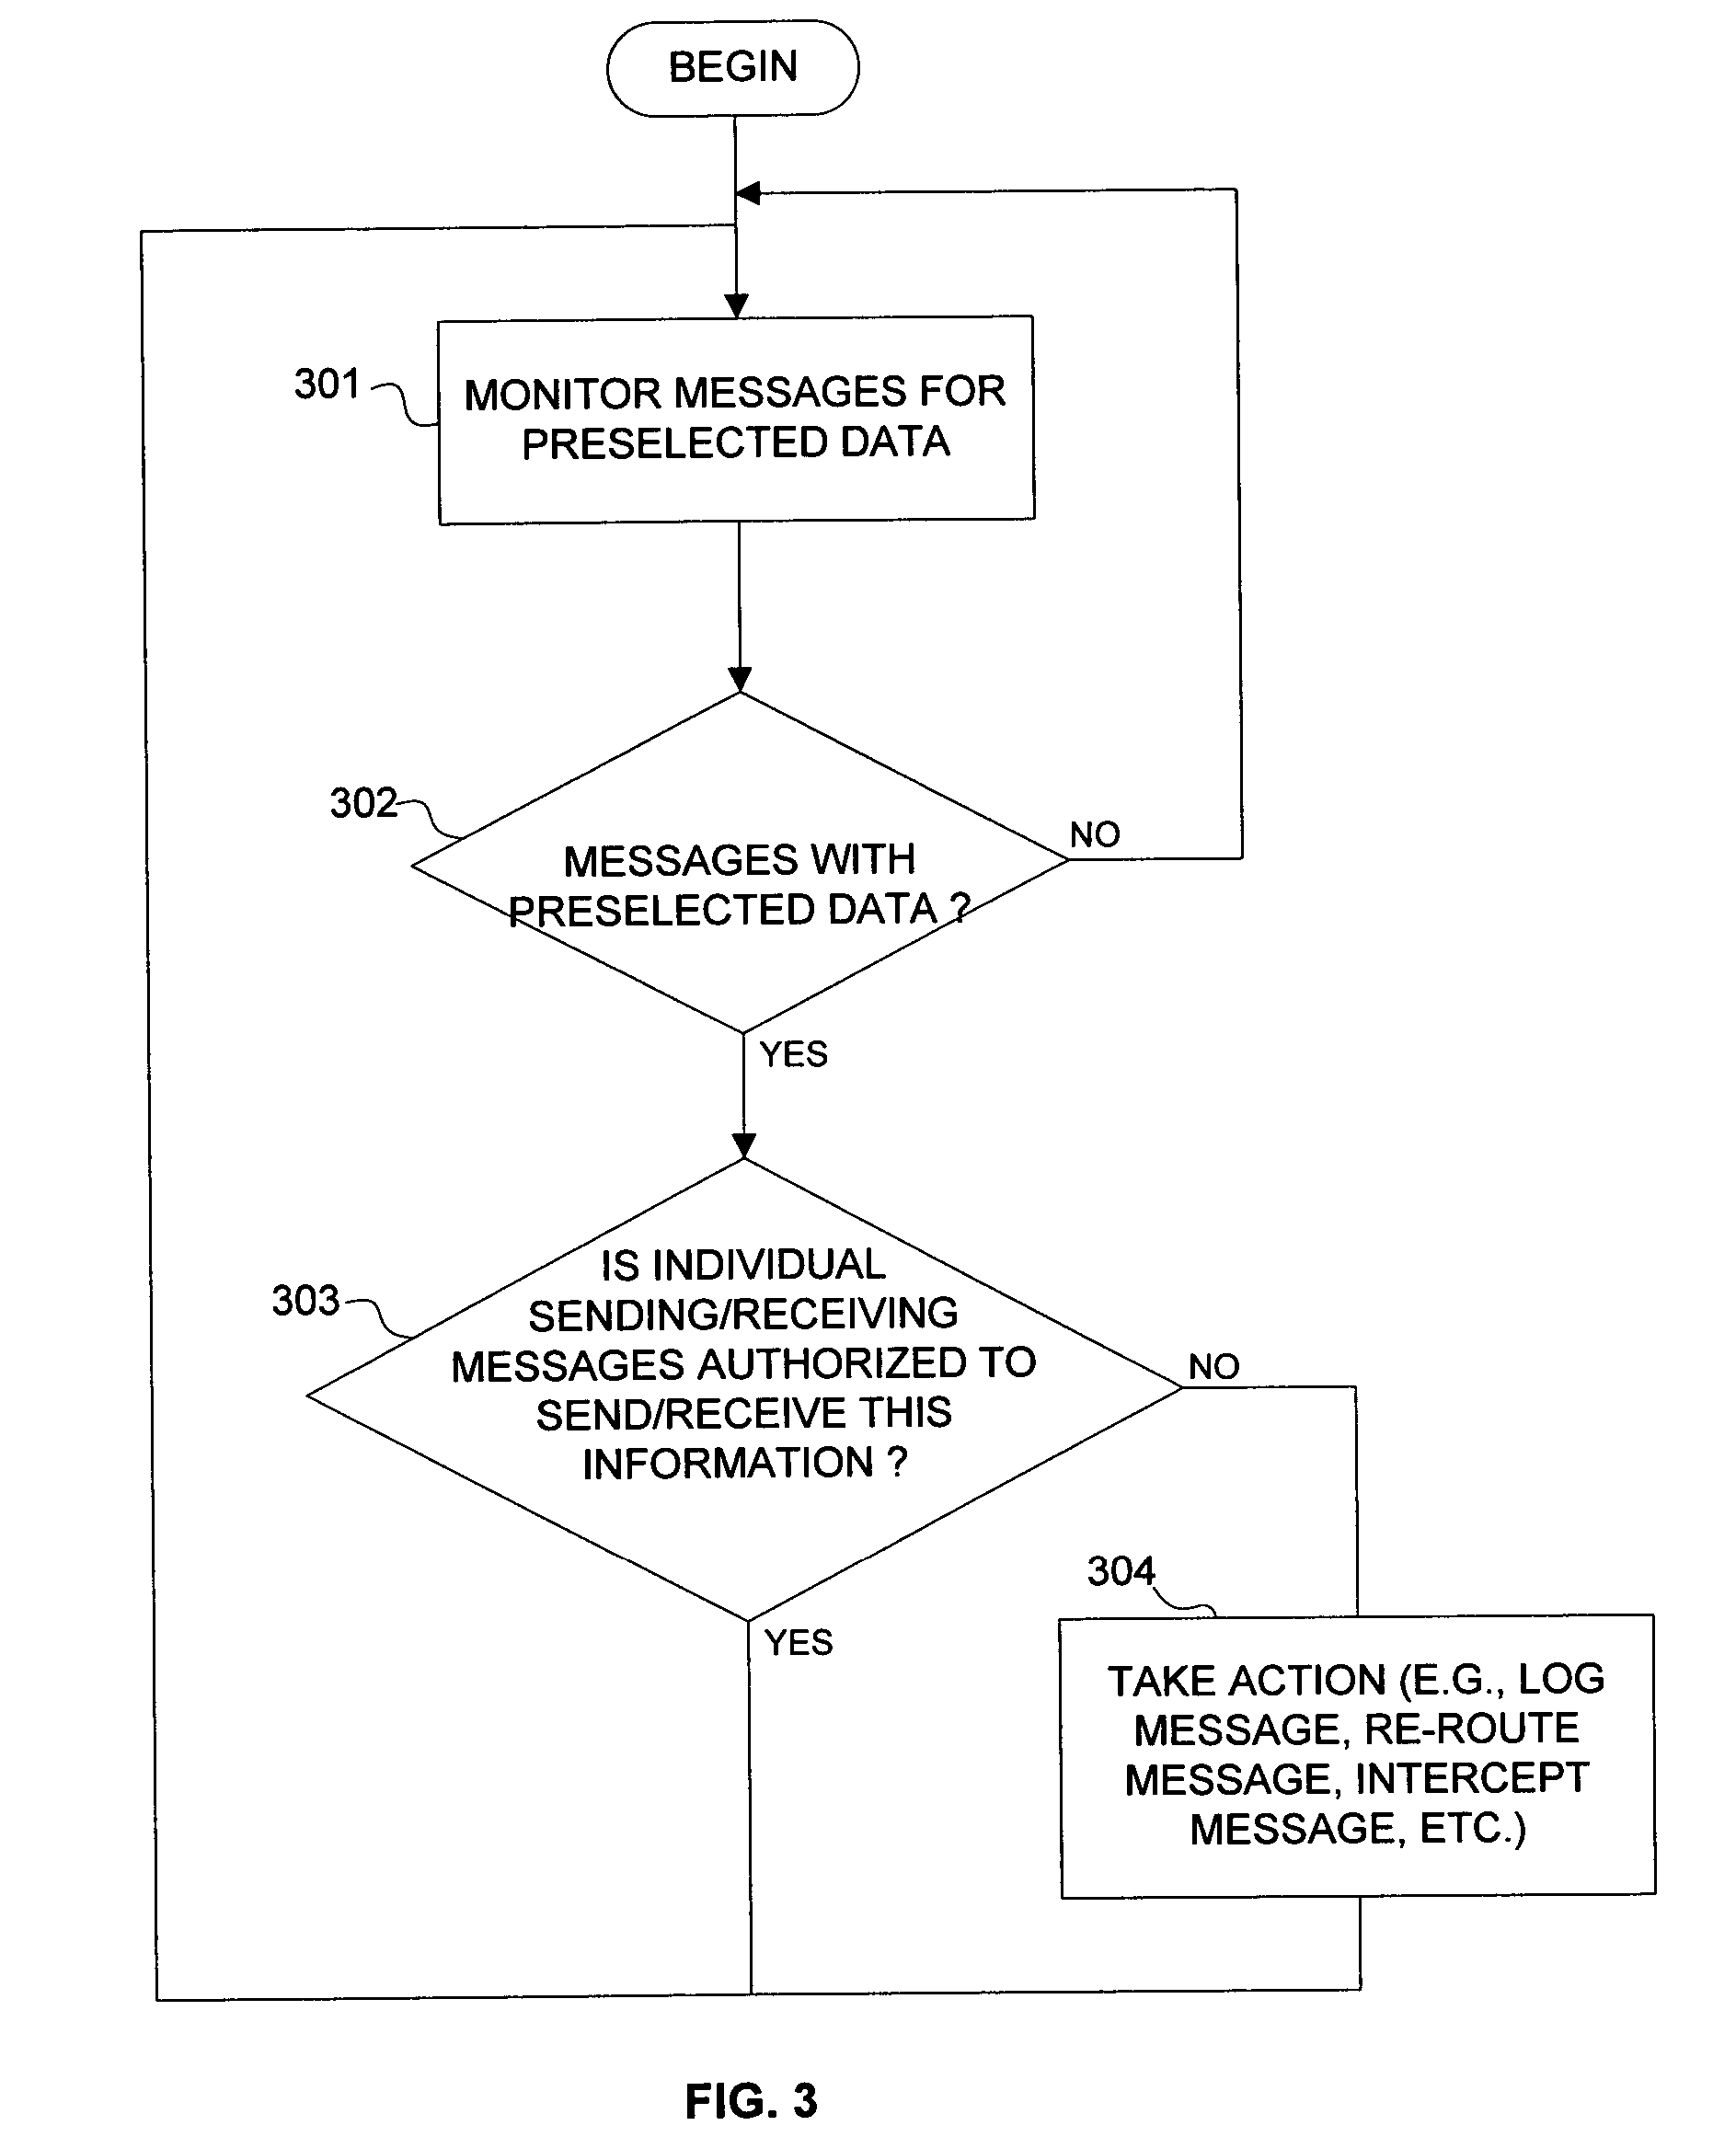 Personal computing device -based mechanism to detect preselected data